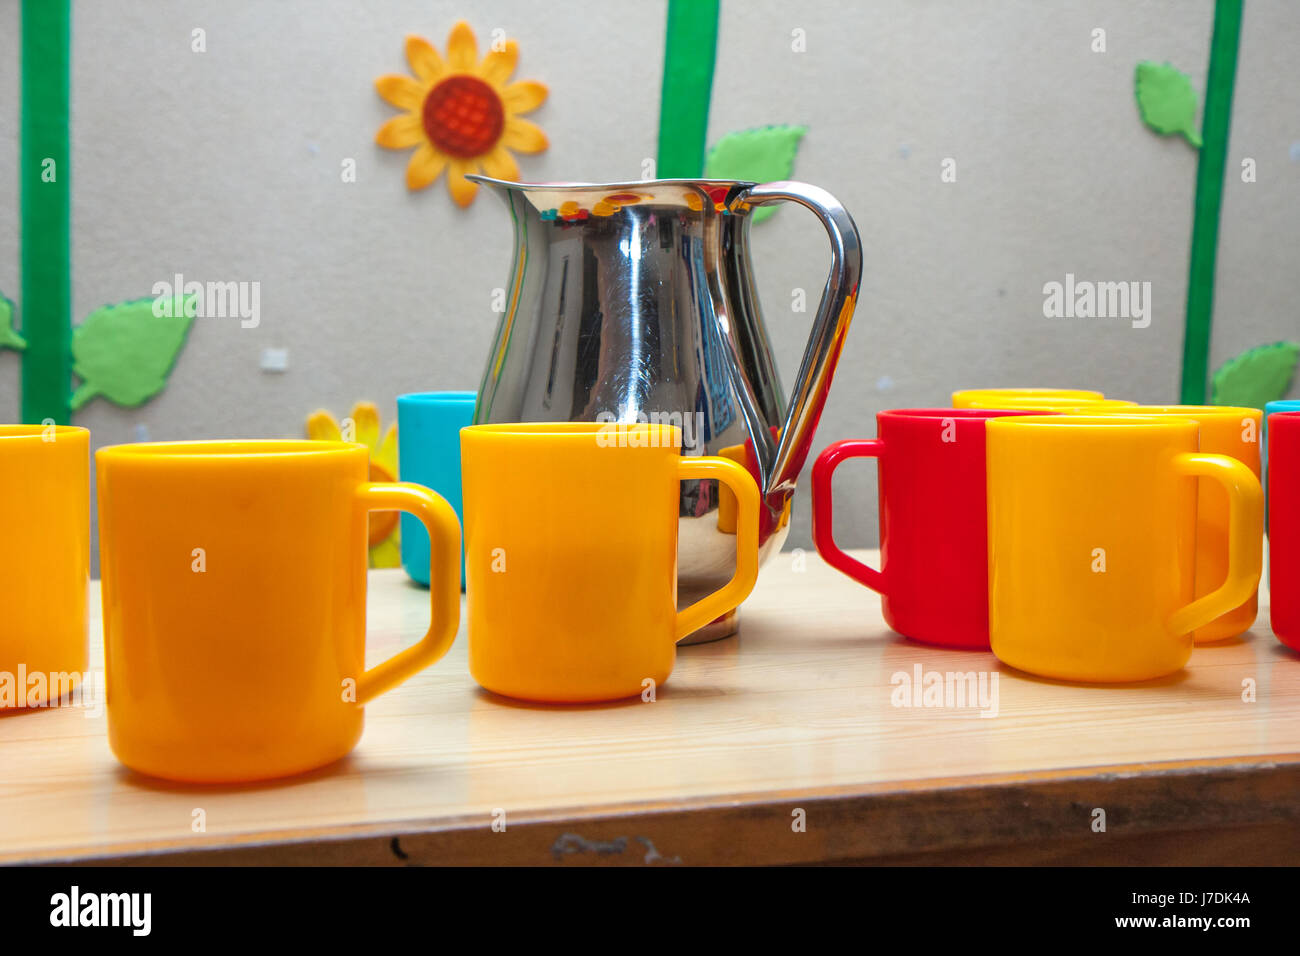 Silver jug and colourful plastic cups stand on a table Stock Photo